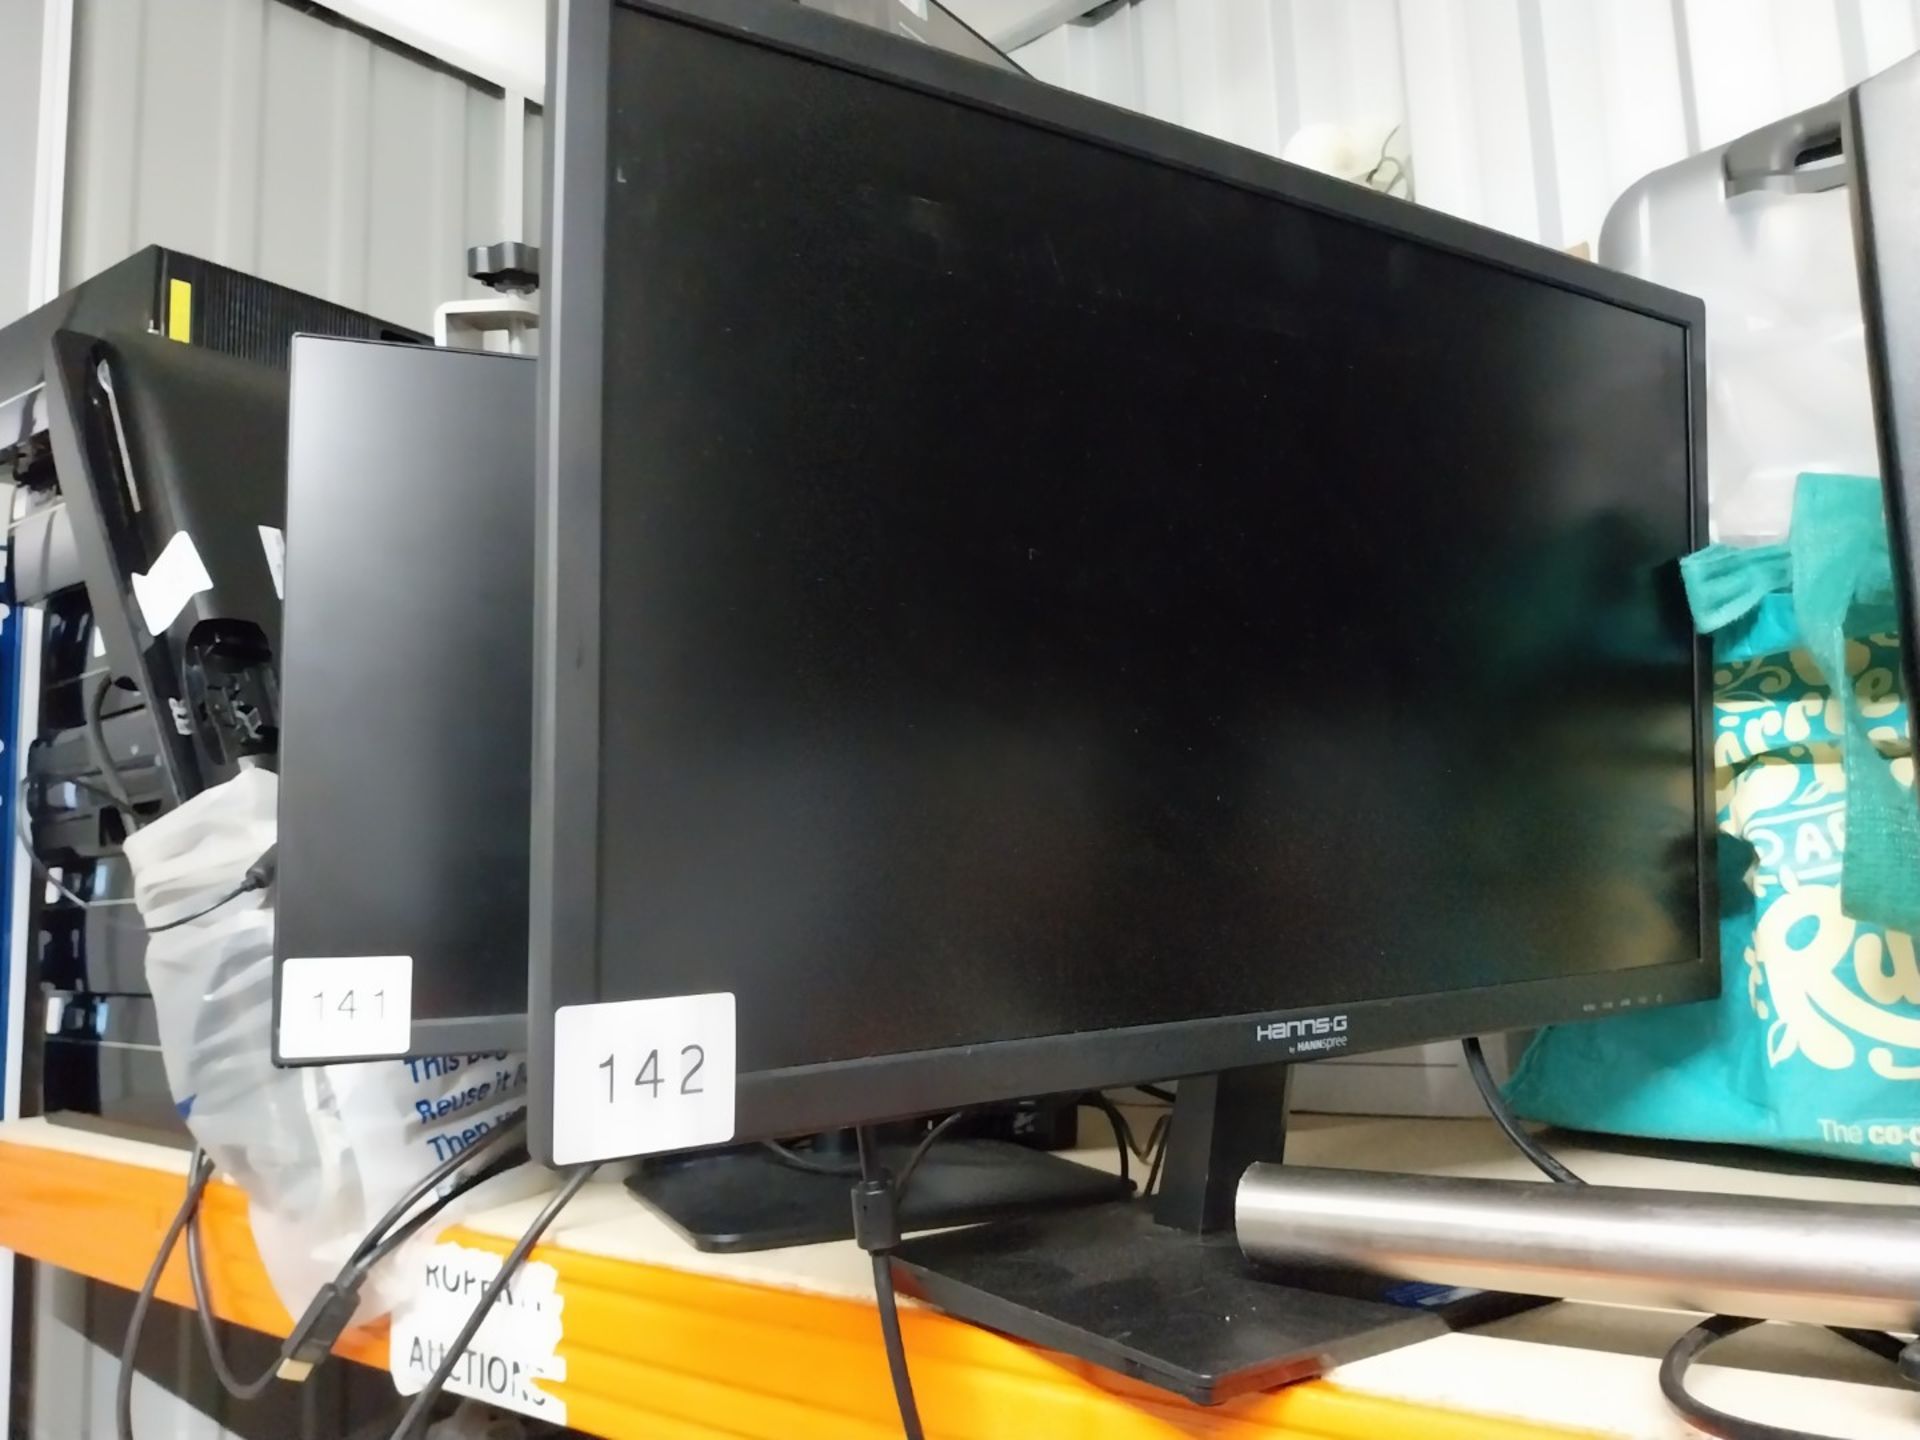 Hannspree Hanns-G HE247DPB LCD monitor (located in Leeds)